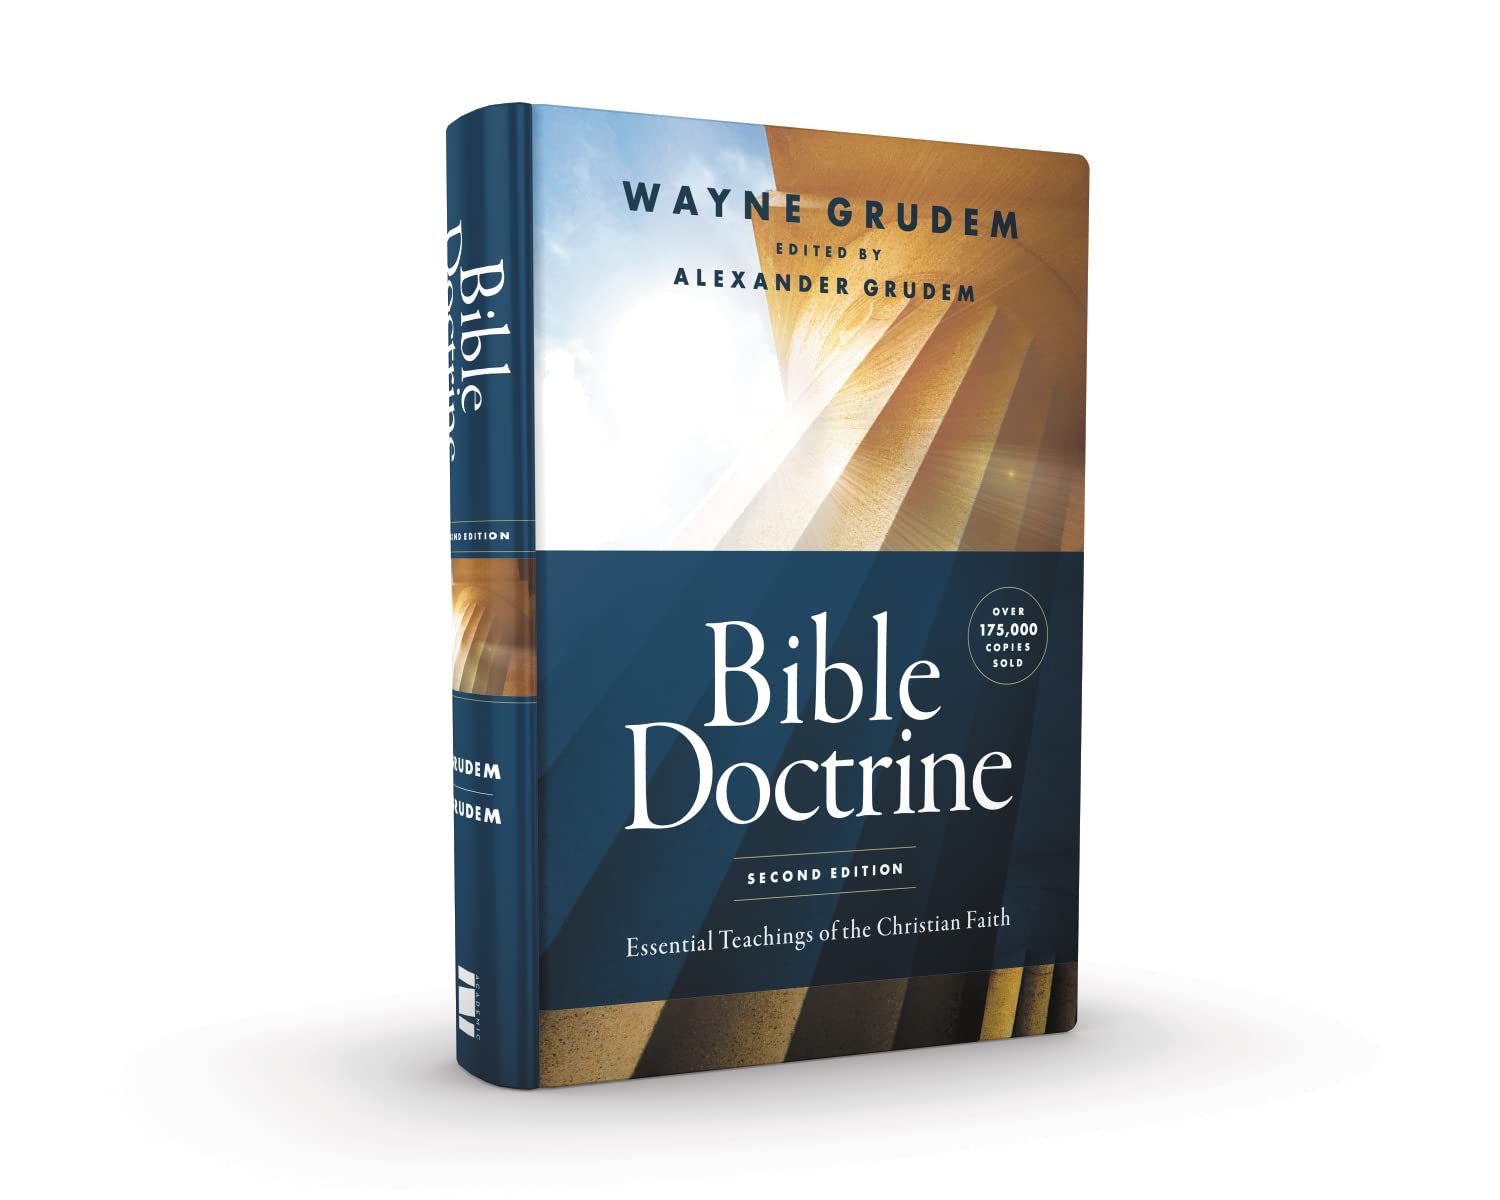 Second　Bible　the　Essential　of　Teachings　Doctrine,　Faith　Hardcover)　Edition:　Christian